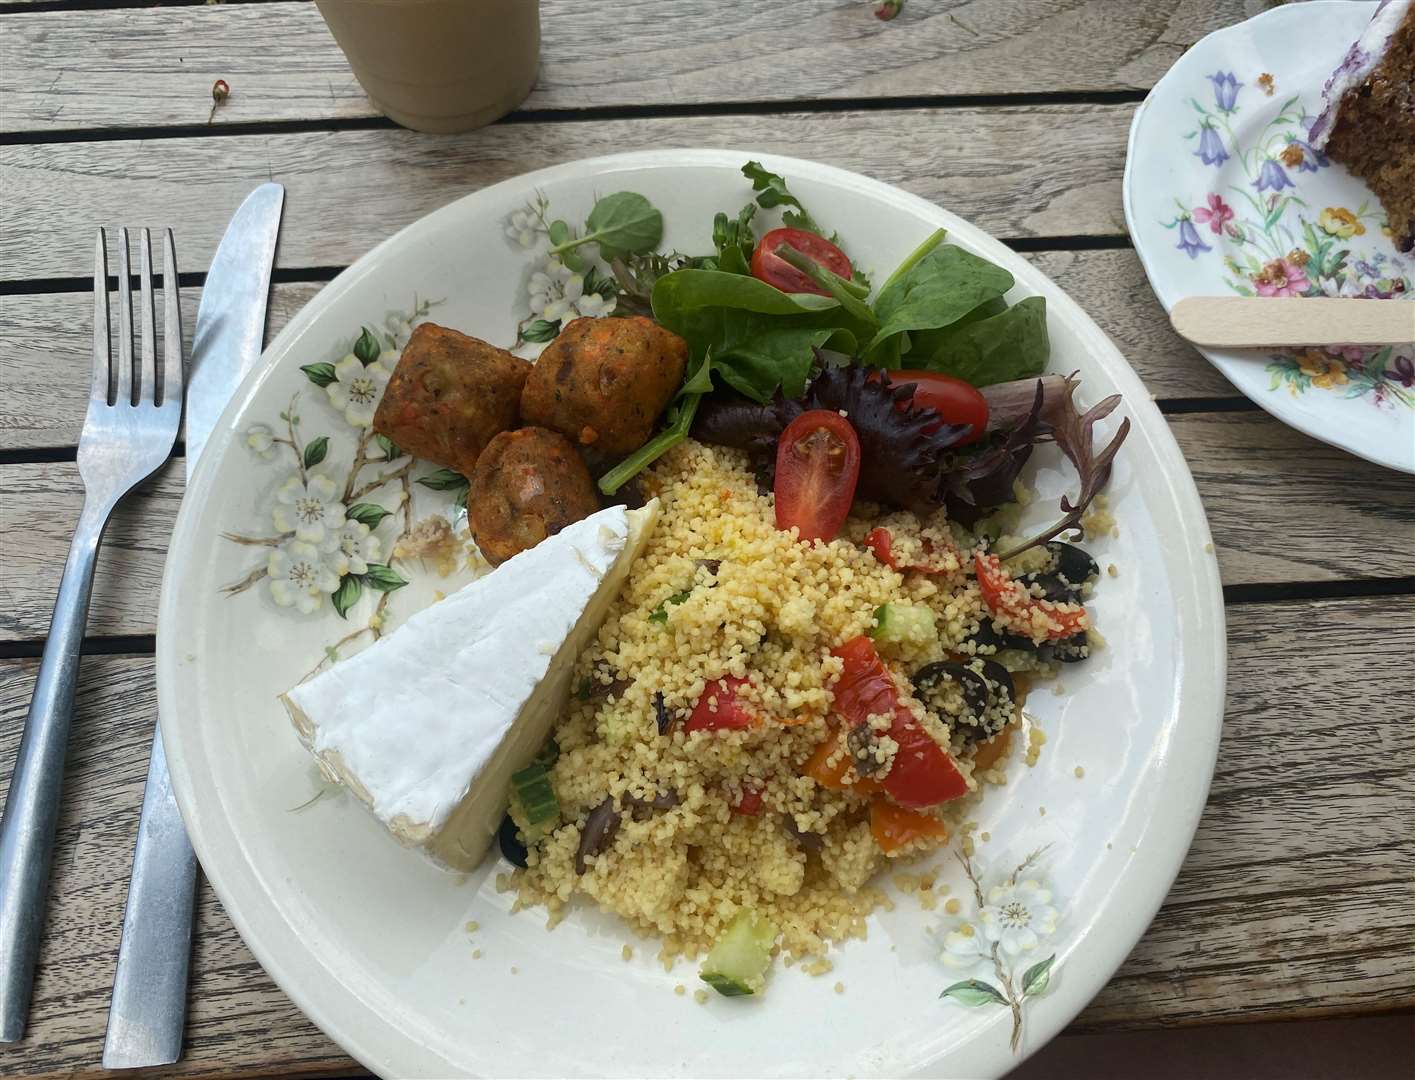 The Mediterranean Salad was £9 and included a summery couscous mix and falafel bites